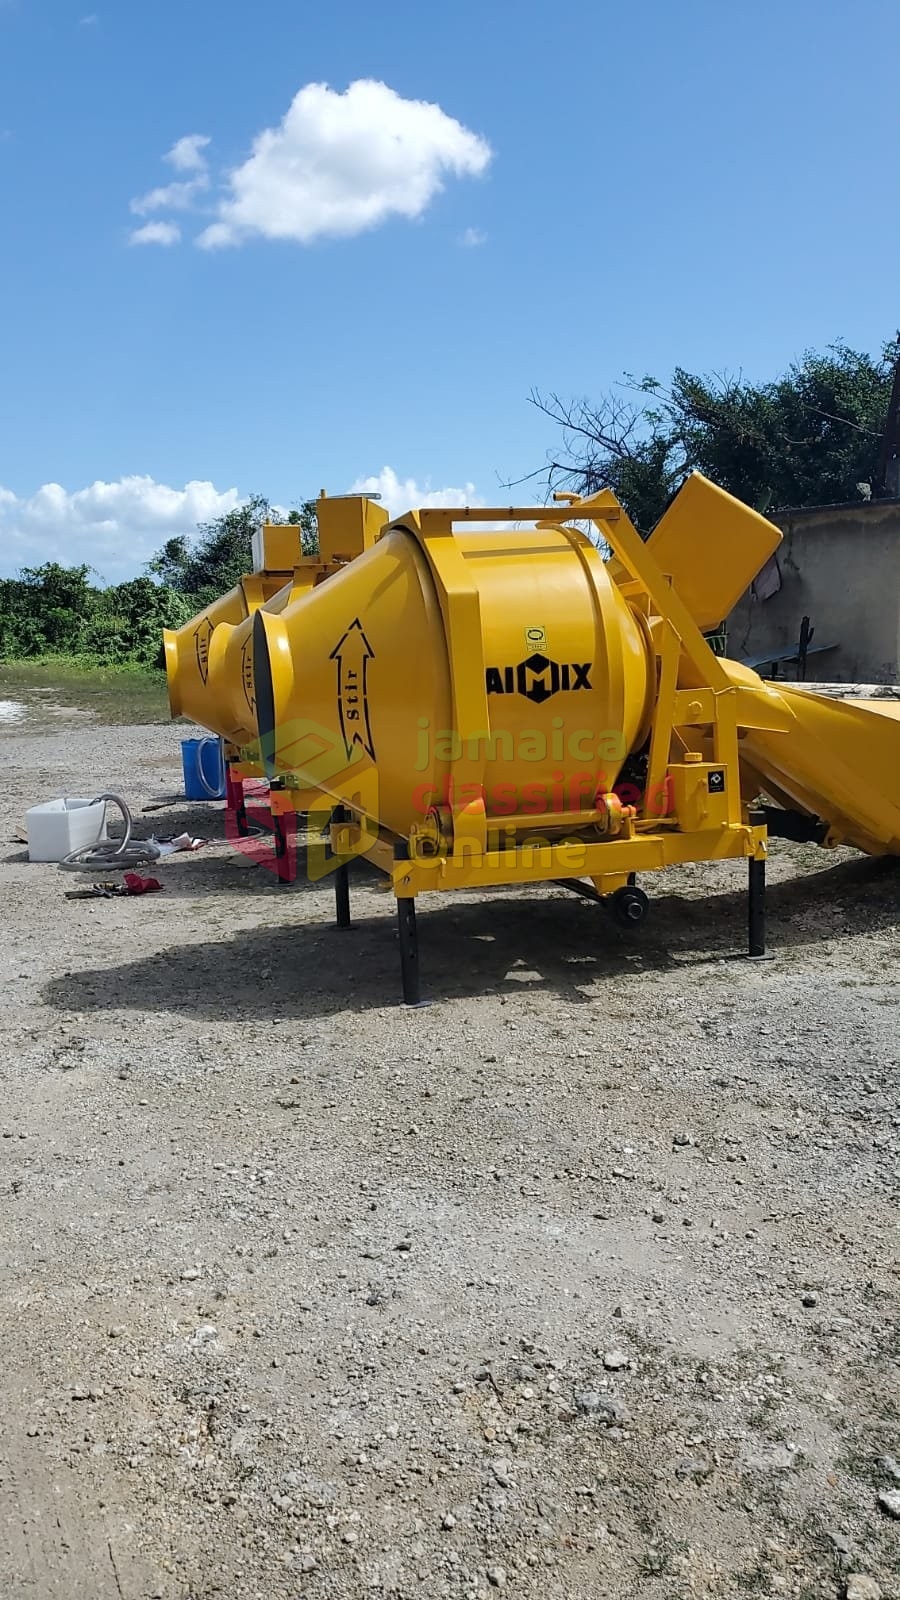 Concrete Mixer For Sale in Kingston Kingston St Andrew - Tools